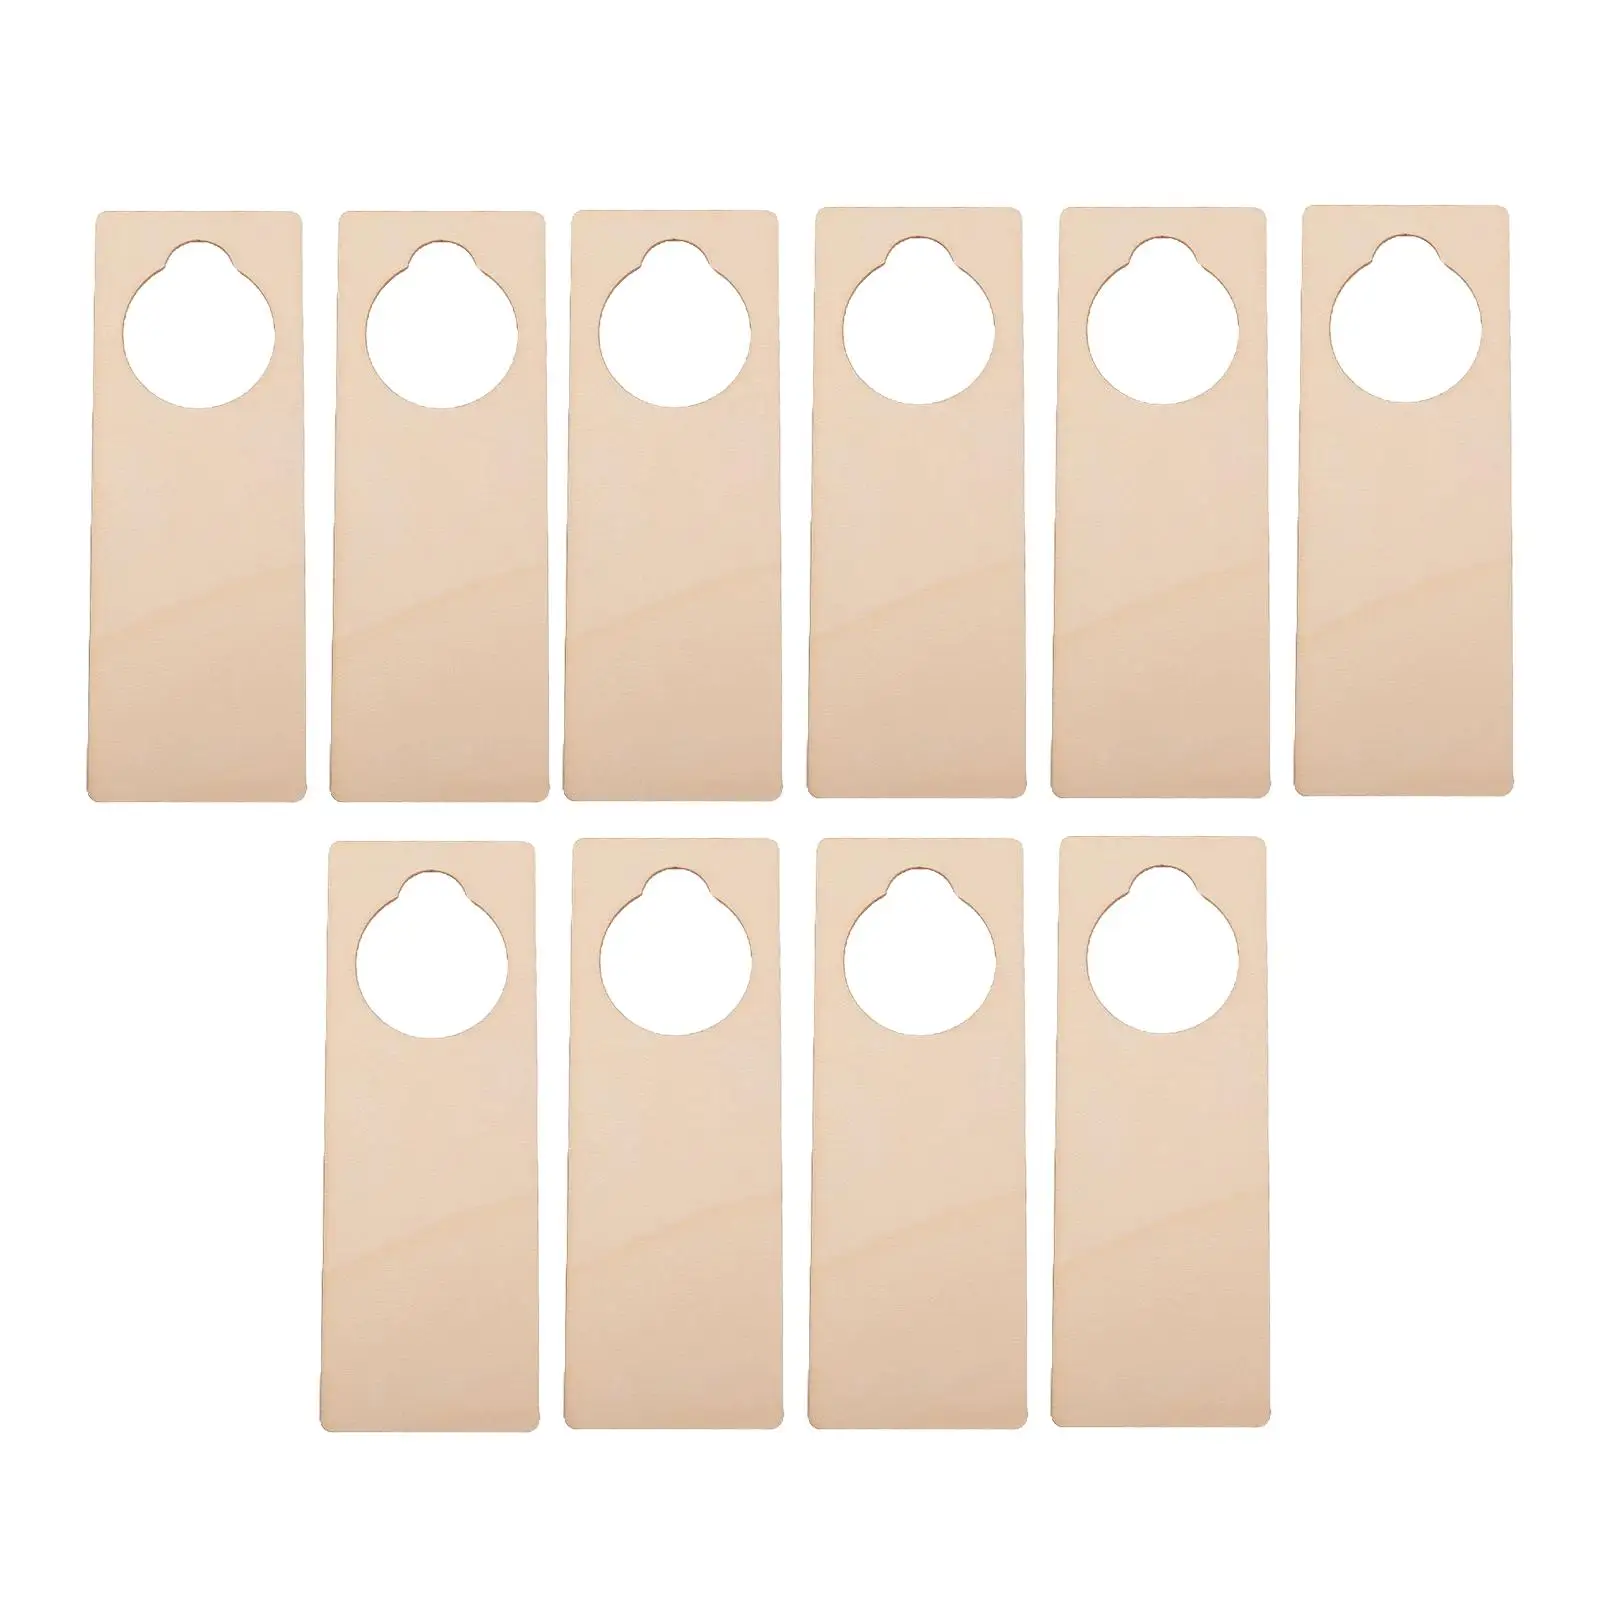 10Pcs Wood Blank Door Signs DIY Plain Plaque Supplies Messages Signs Banners Craft Decorative for Hotel Bedroom Office Home